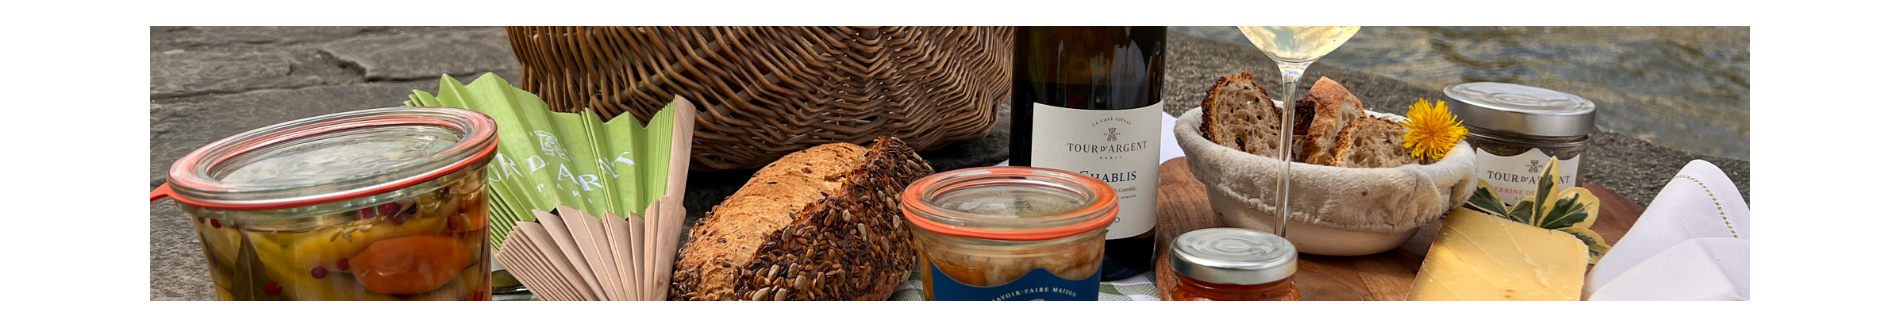 Luxury French aperitif - Tour d'Argent (fine food hampers, champagne)